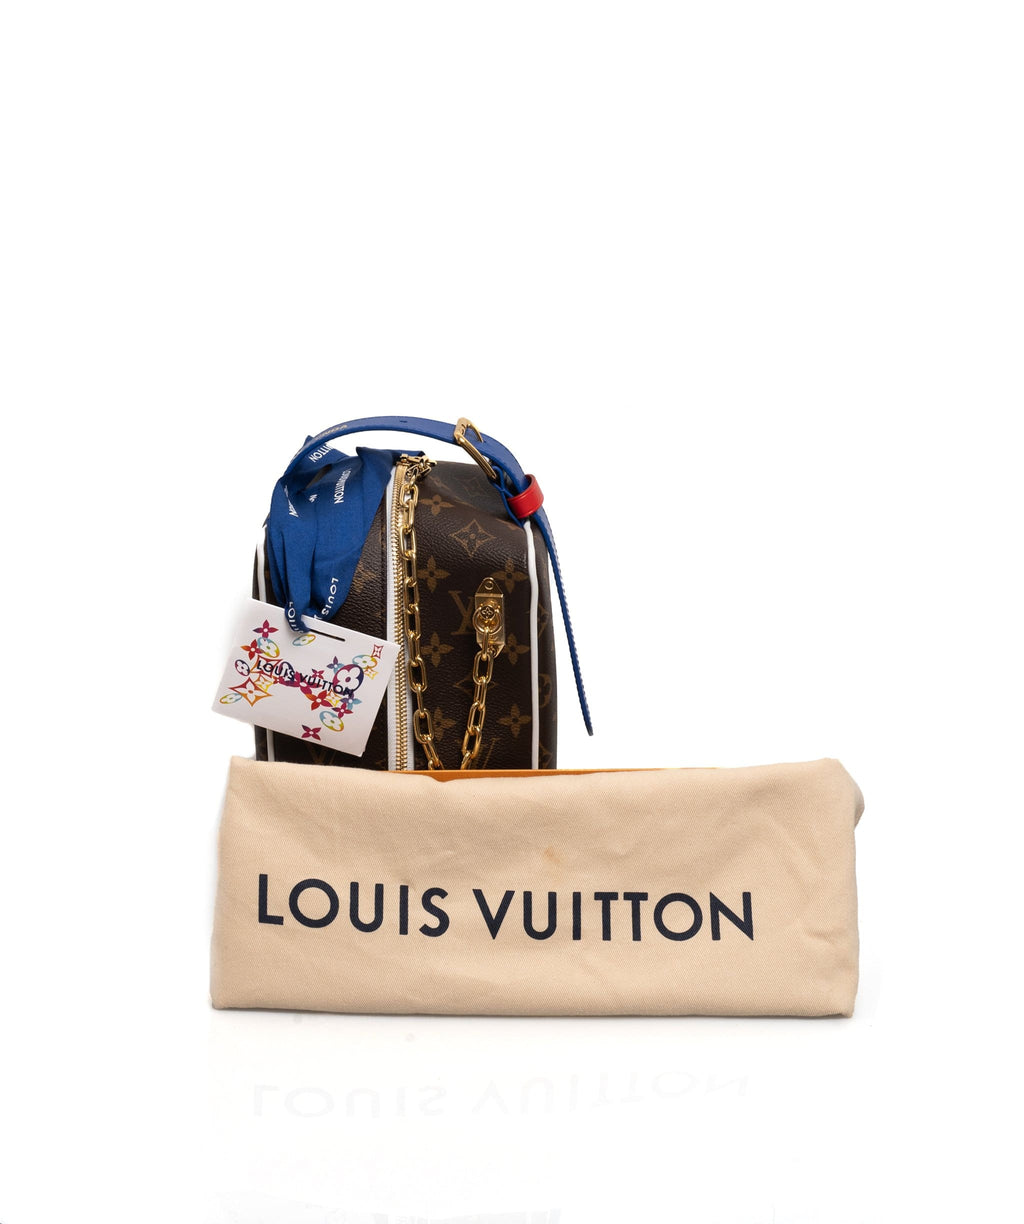 Dopp kit cloakroom leather bag Louis Vuitton X NBA Black in Leather -  17703116